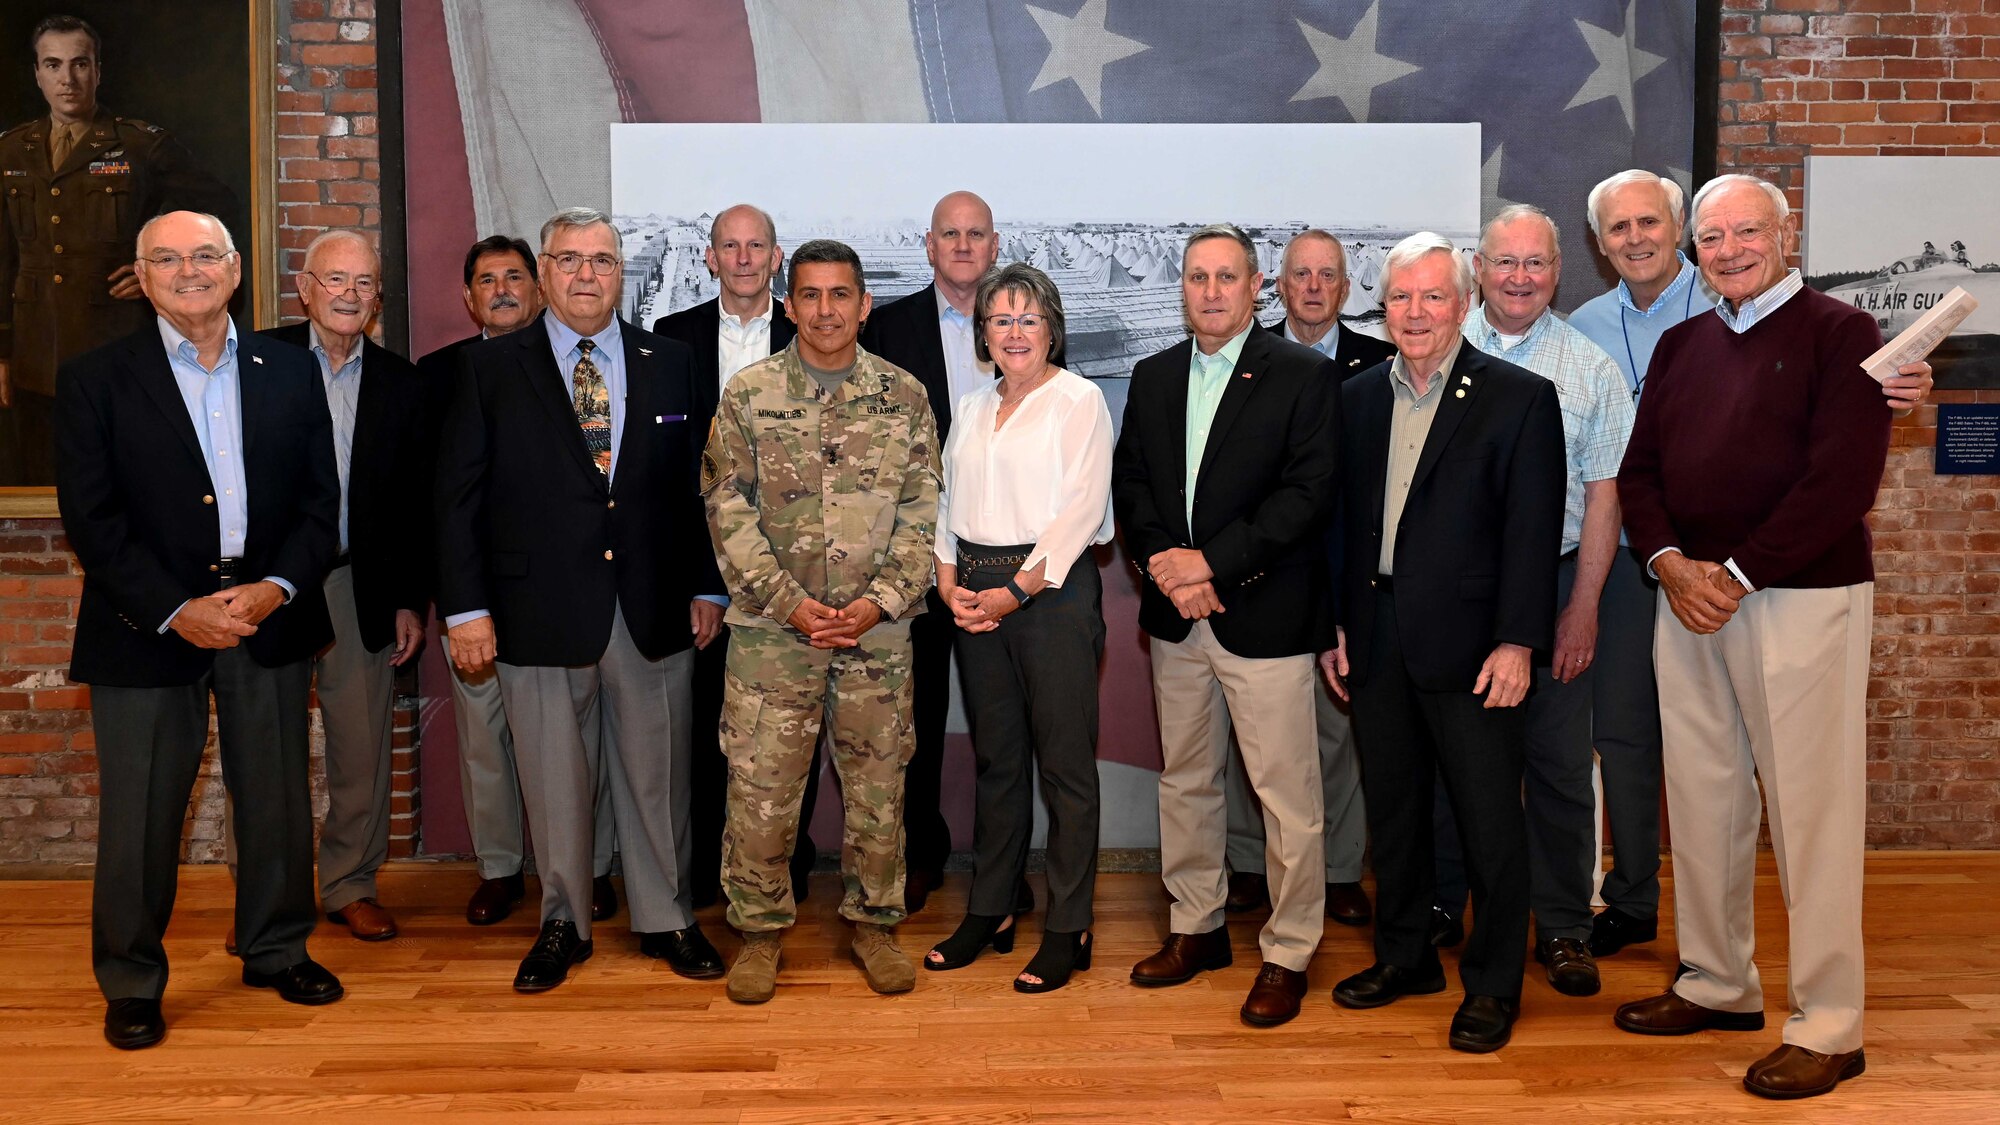 New Hampshire Adjutant Gen. David Mikolaities poses with distinguished guests during the NHNG's Heritage Room ribbon-cutting ceremony held in Concord on May 20, 2022.